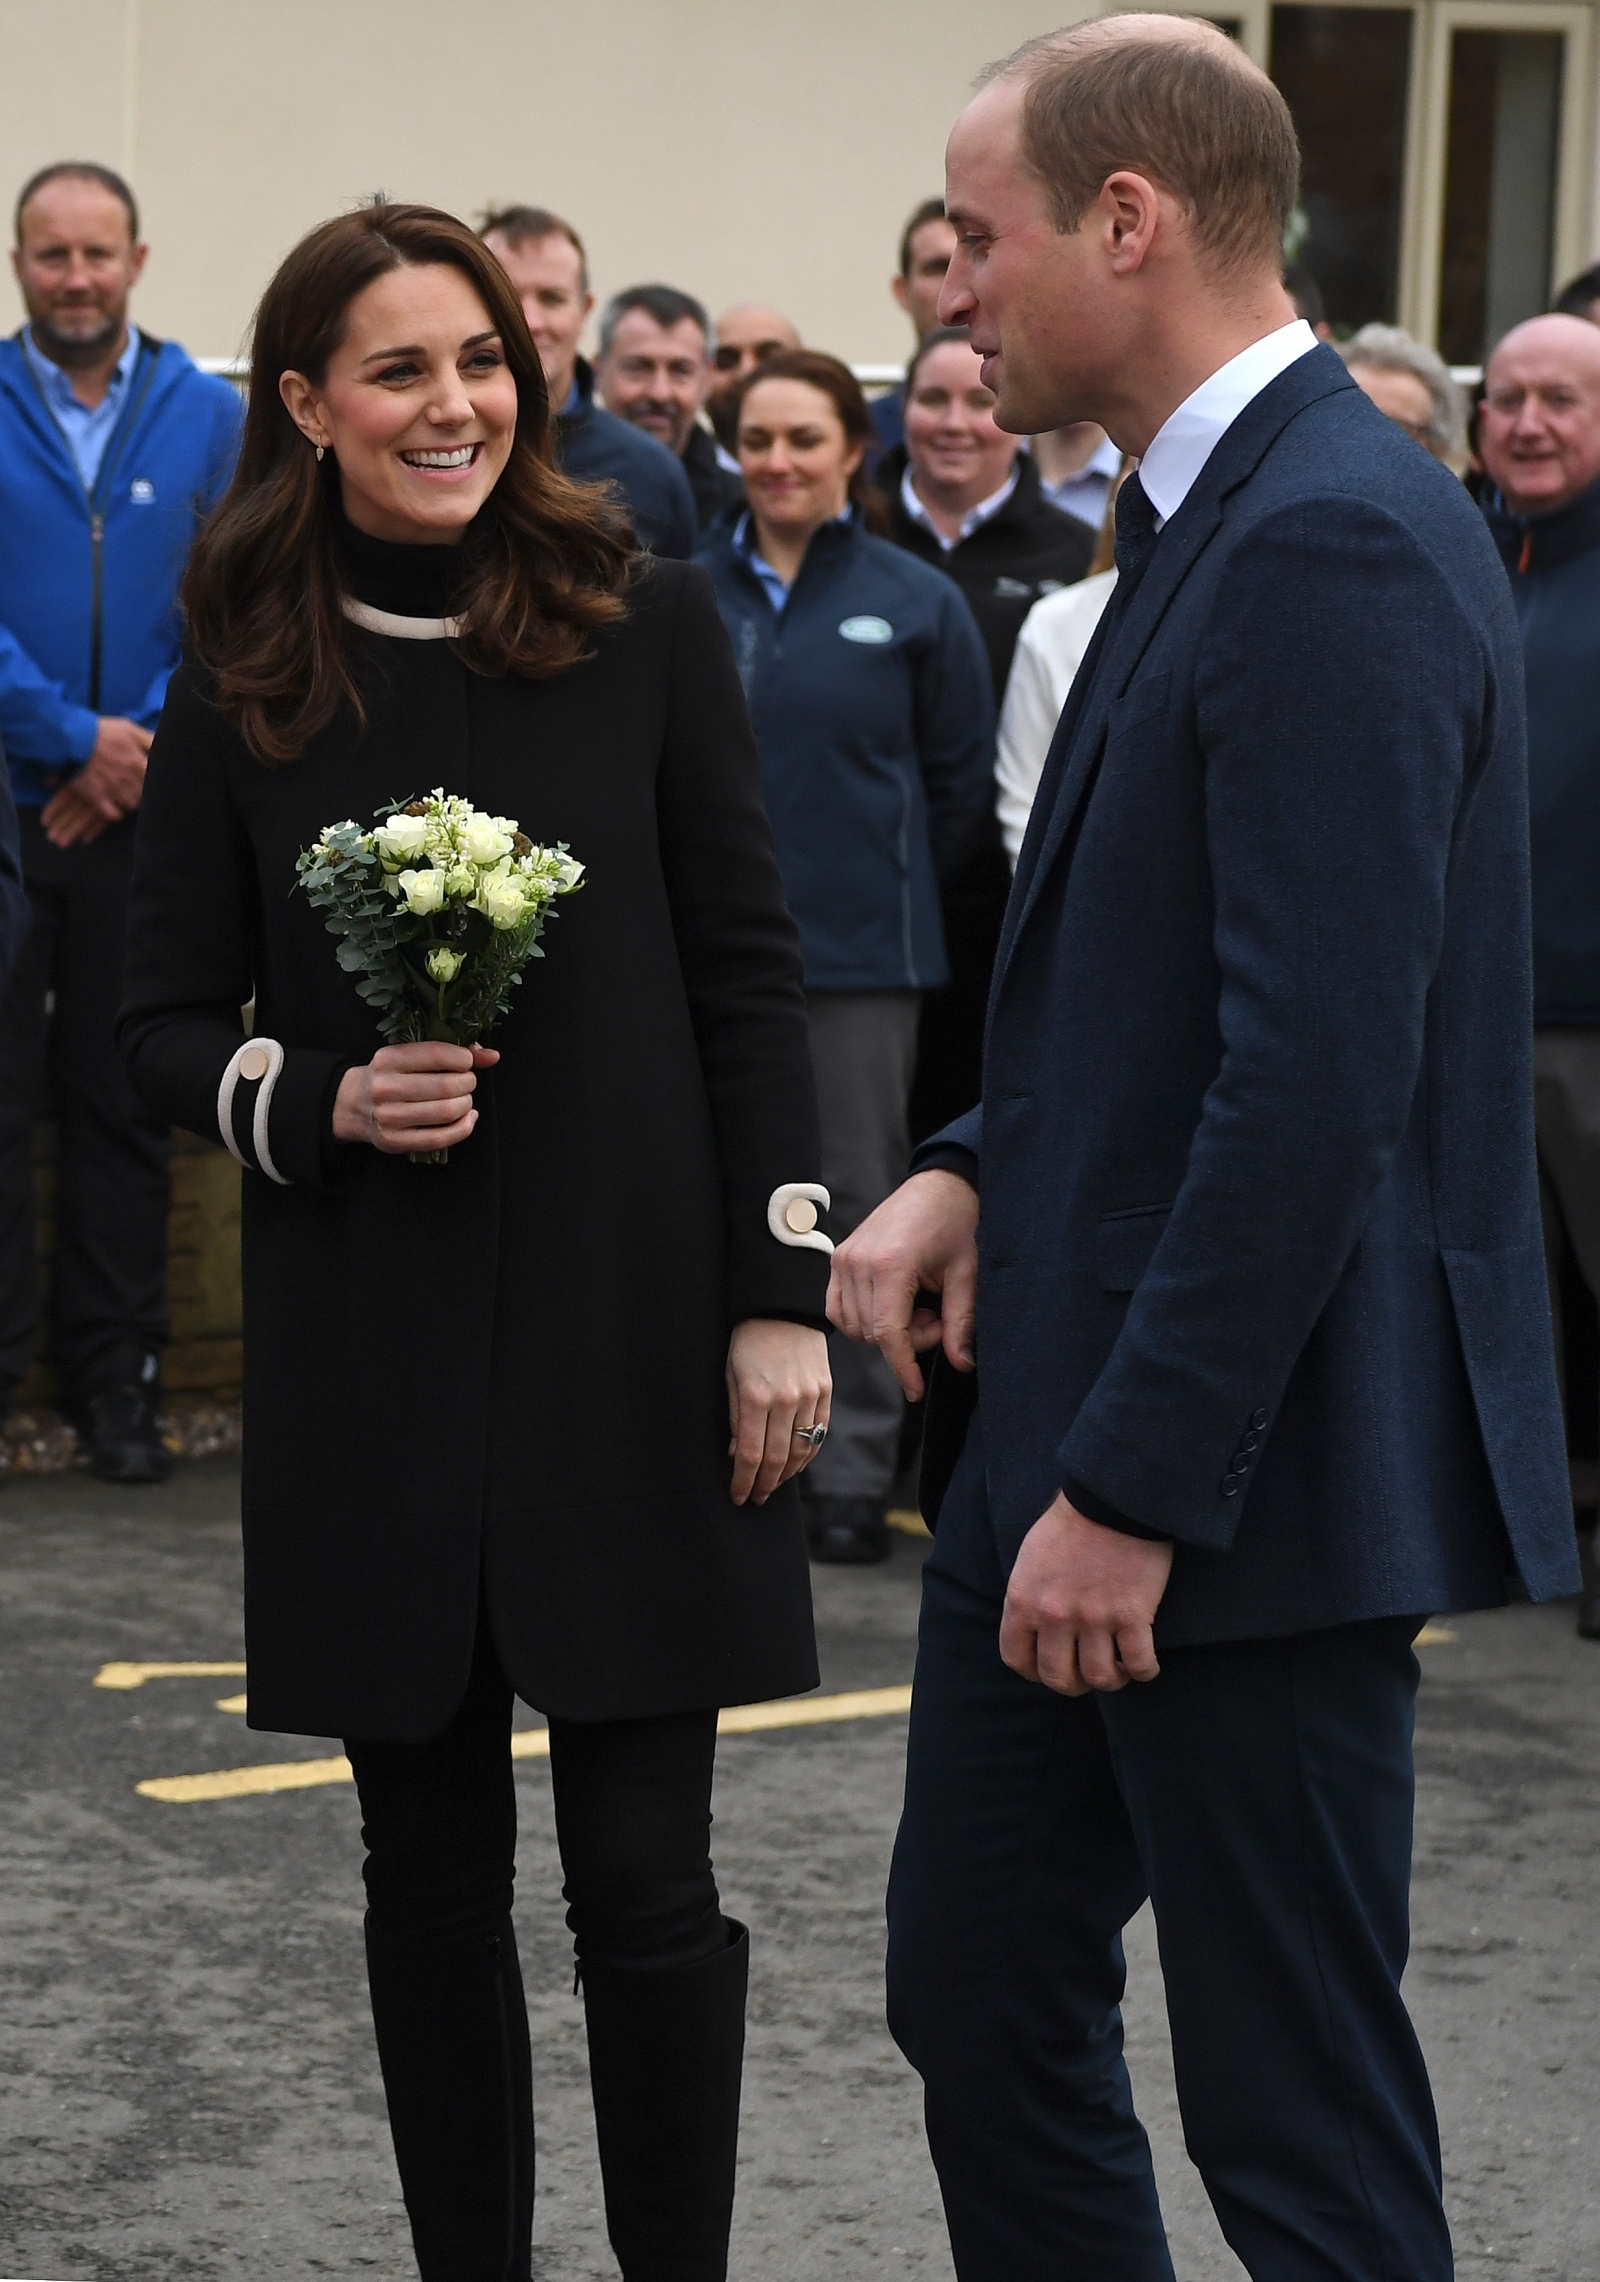 Prince William gave Kate Middleton 'most romantic' Valentine's Day surprise thumbnail